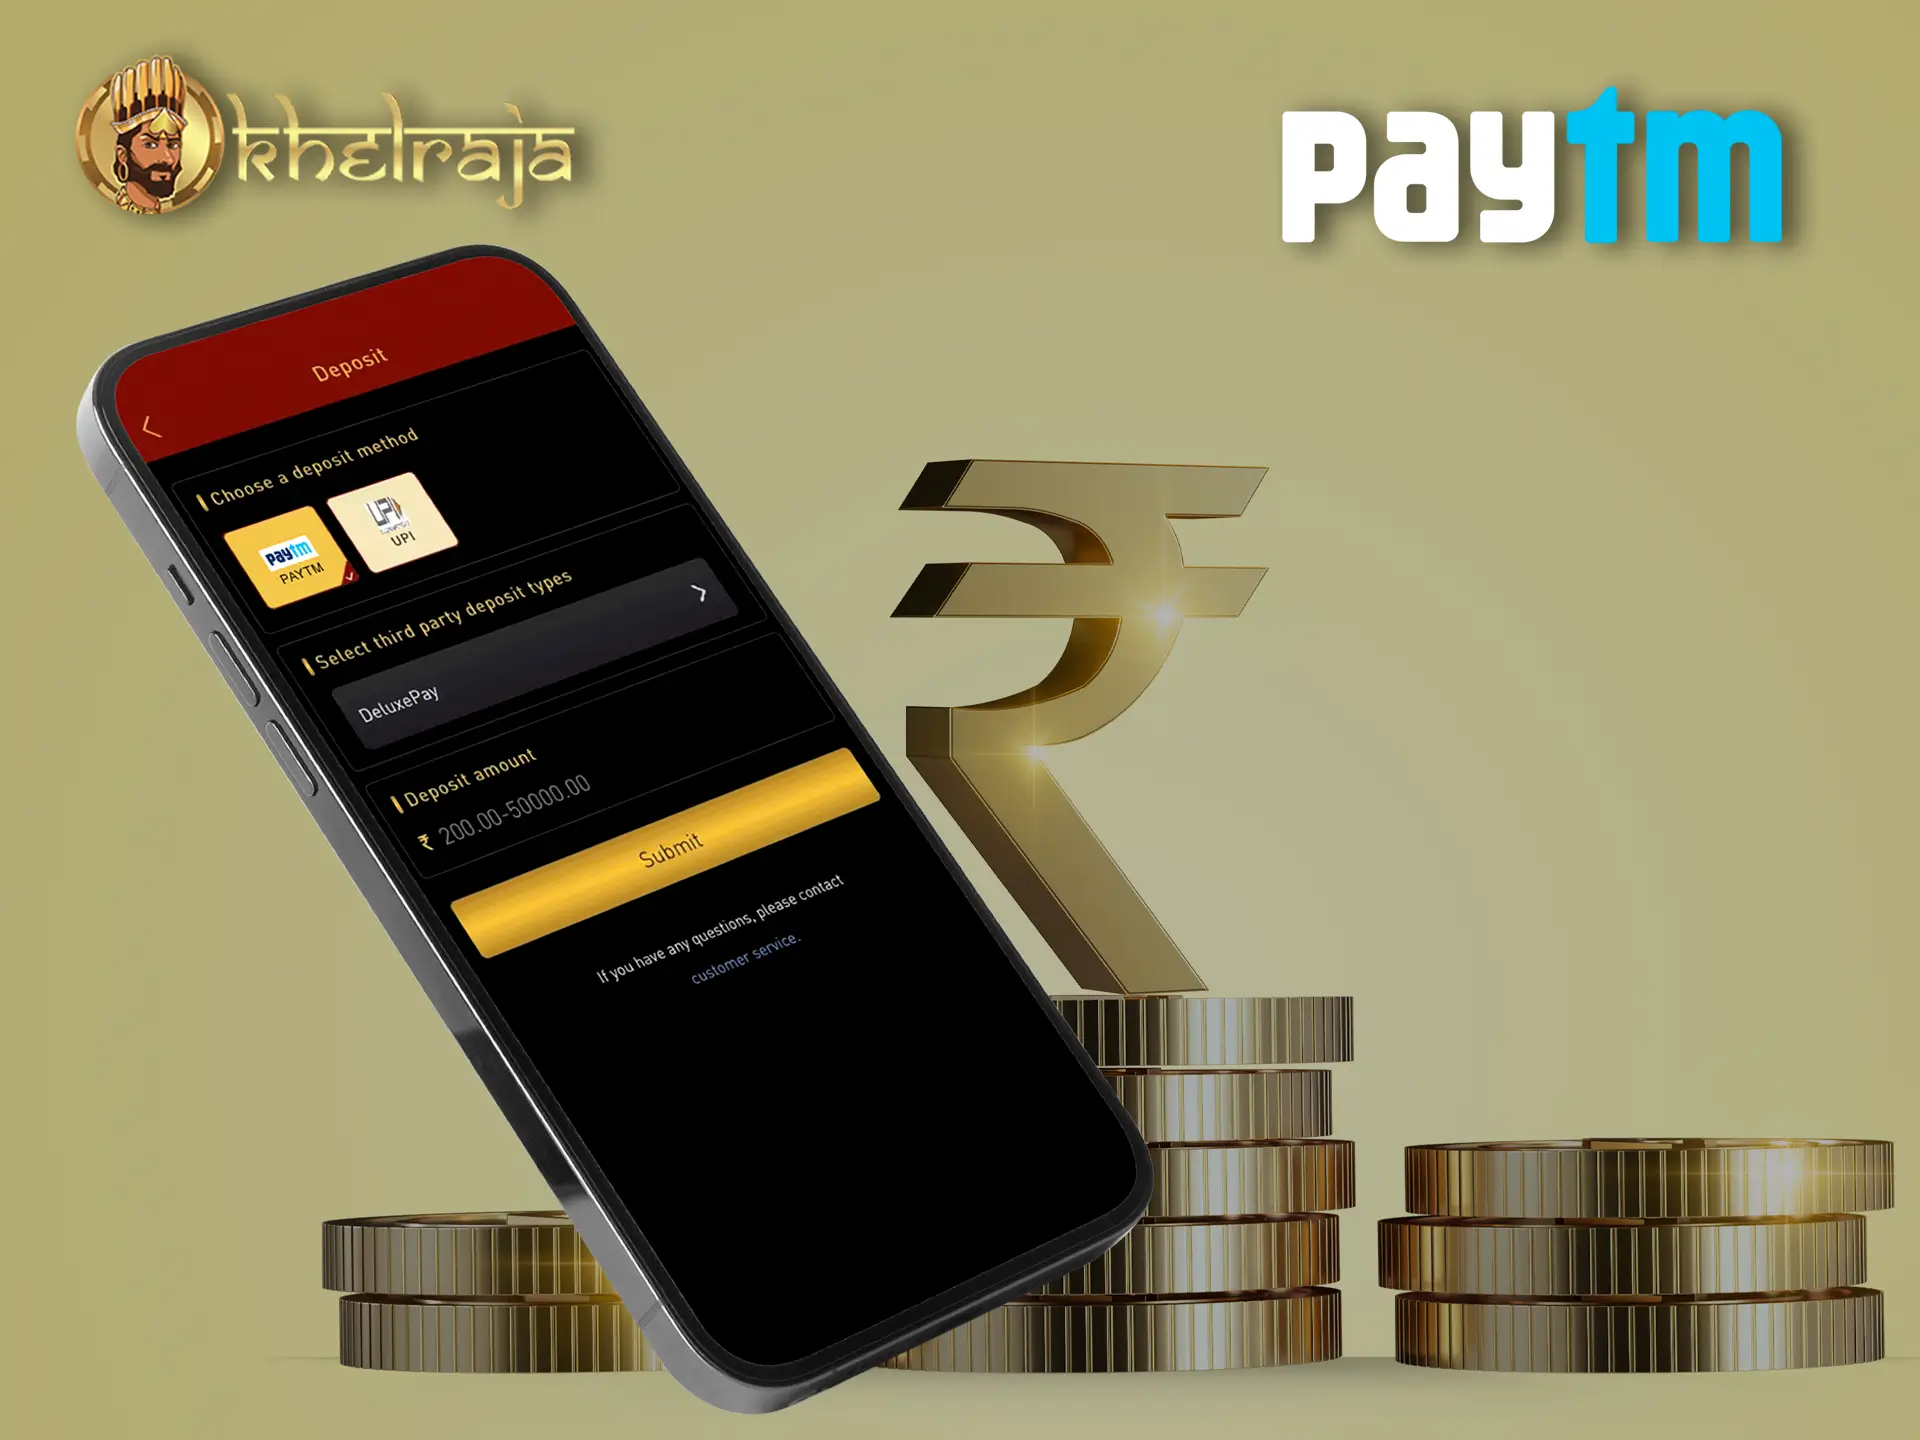 Khelraja Casino has a long-standing partnership with PayTm so you are free to use the payments you need.